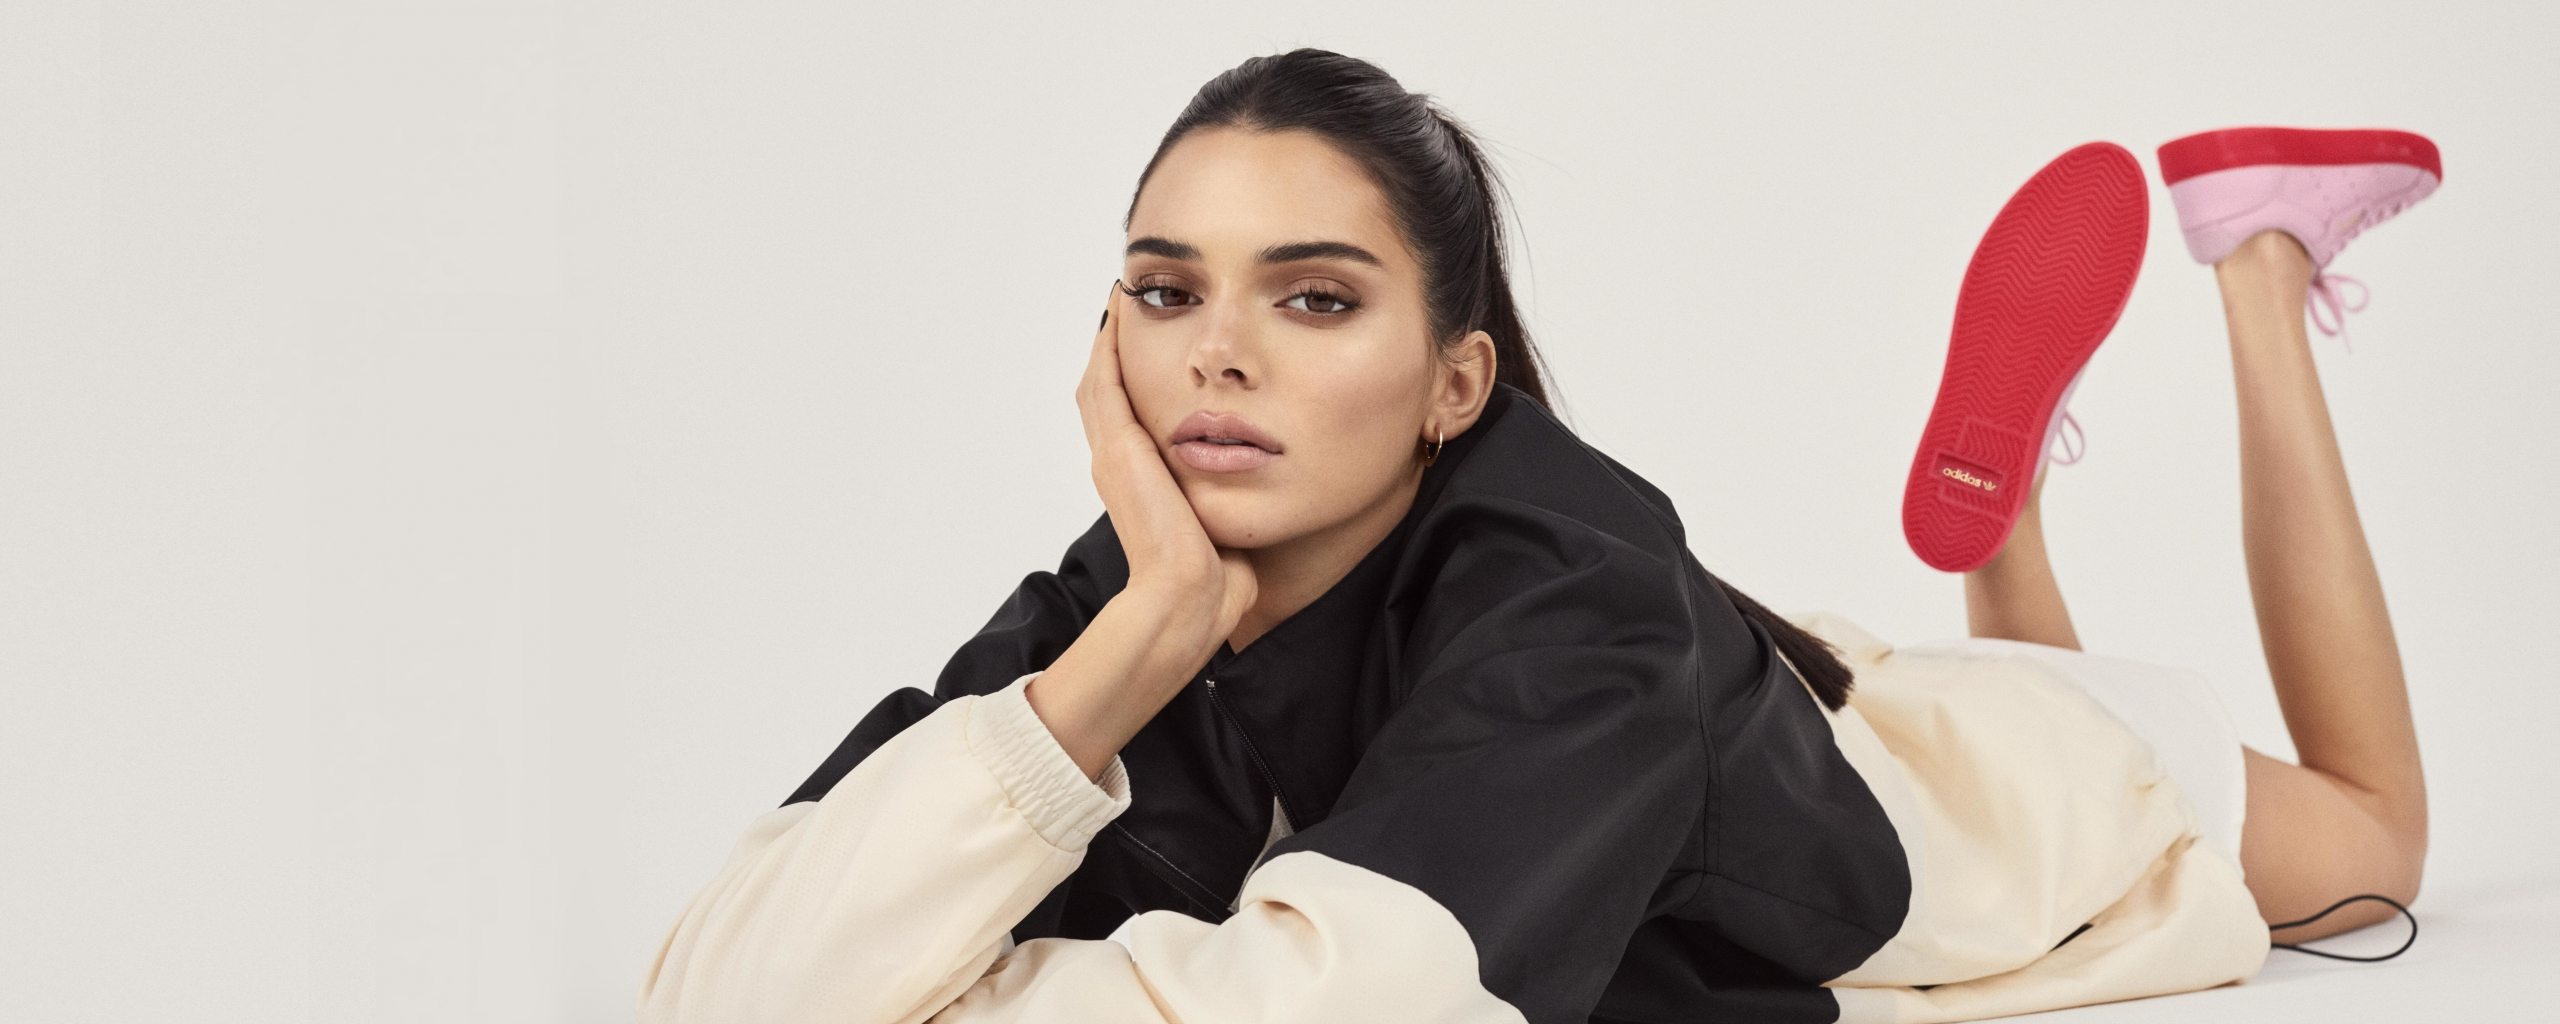 Download wallpaper 2560x1024 kendall jenner, adidas, 2019, dual wide 21 ...